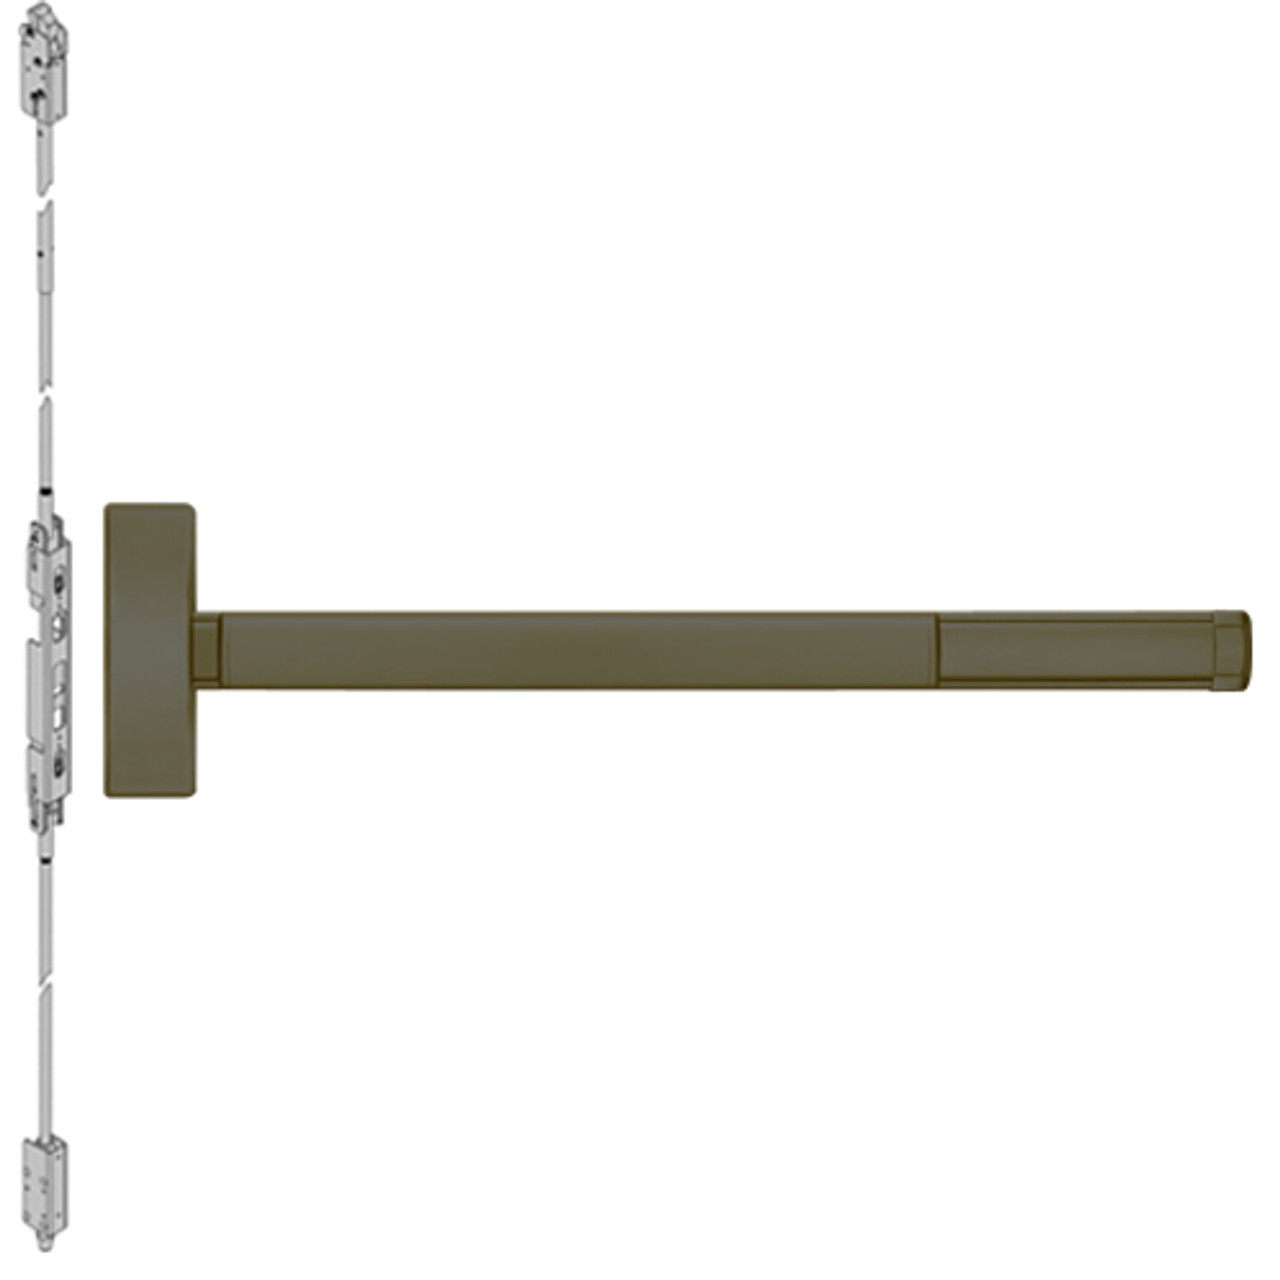 DE2802LBR-613-48 PHI 2800 Series Concealed Vertical Rod Exit Device with Delayed Egress Prepped for Dummy Trim in Oil Rubbed Bronze Finish